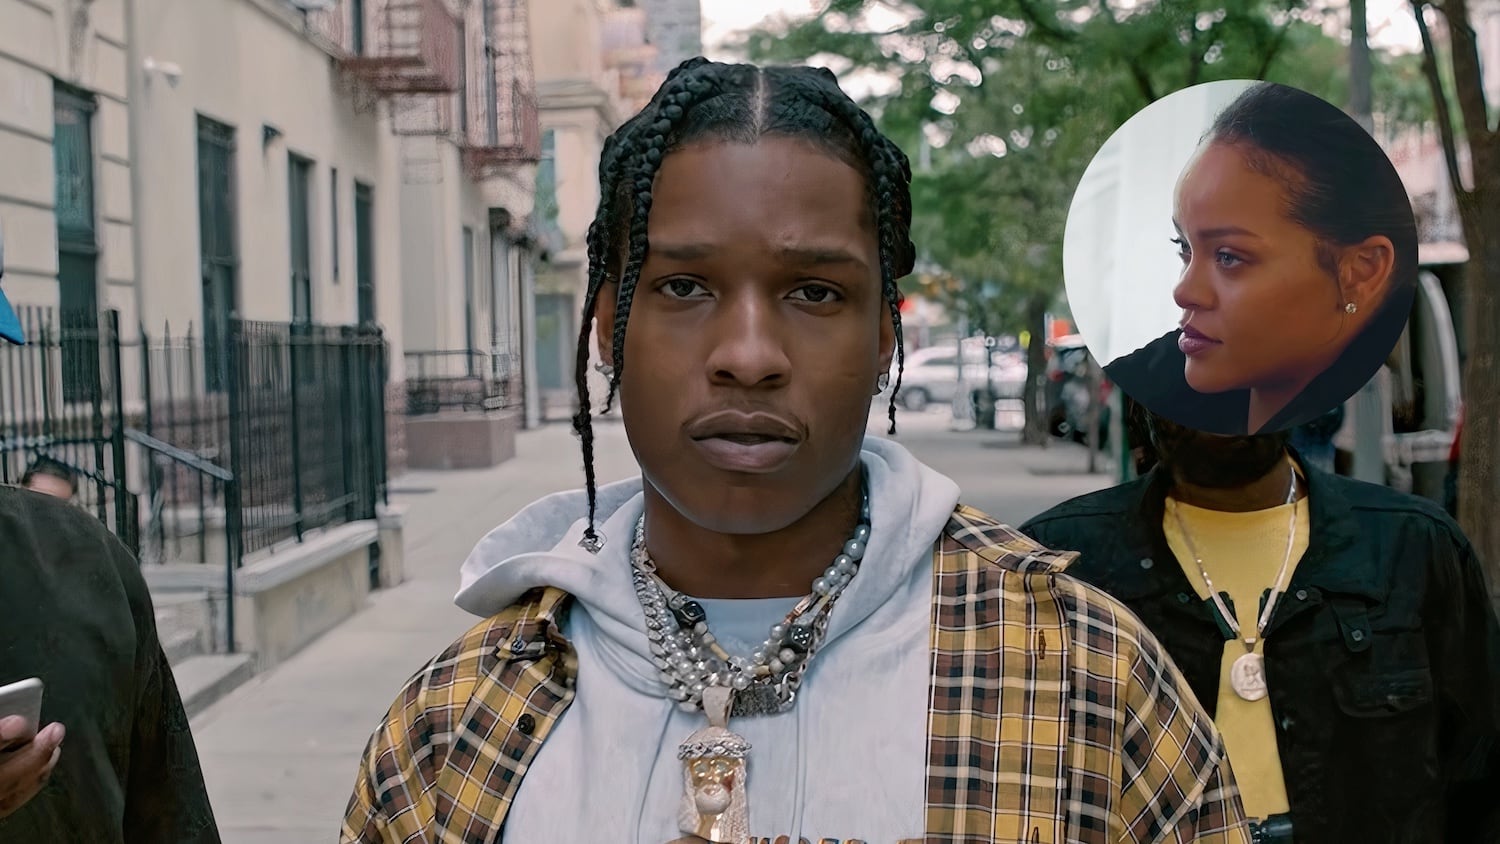 ASAP Rocky Arrested At LAX After Vacationing With Rihanna For Alleged Shooting